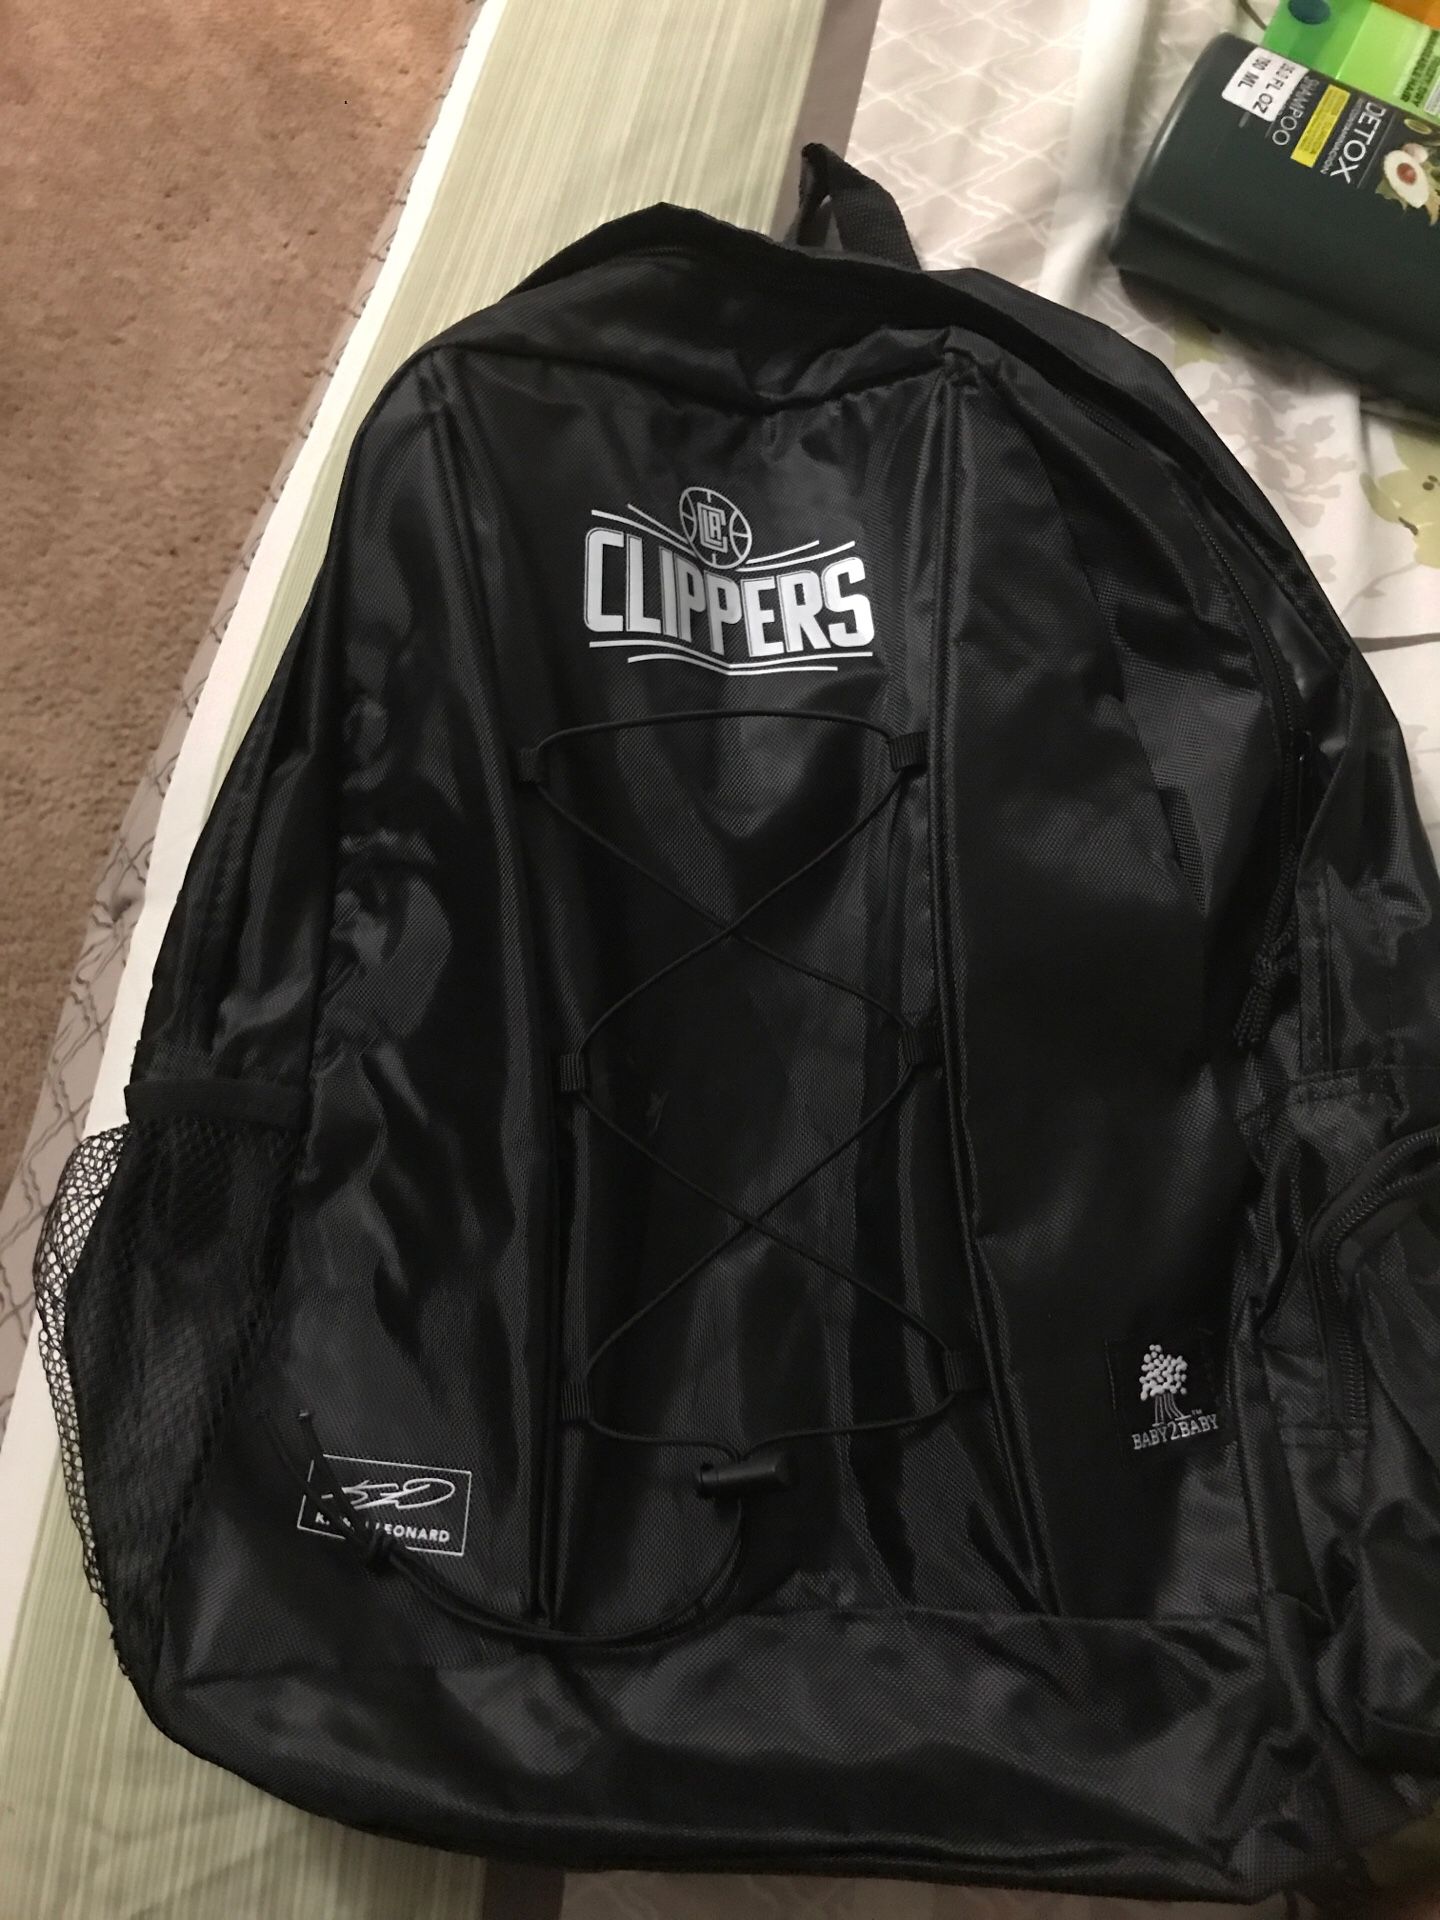 Clippers black backpack